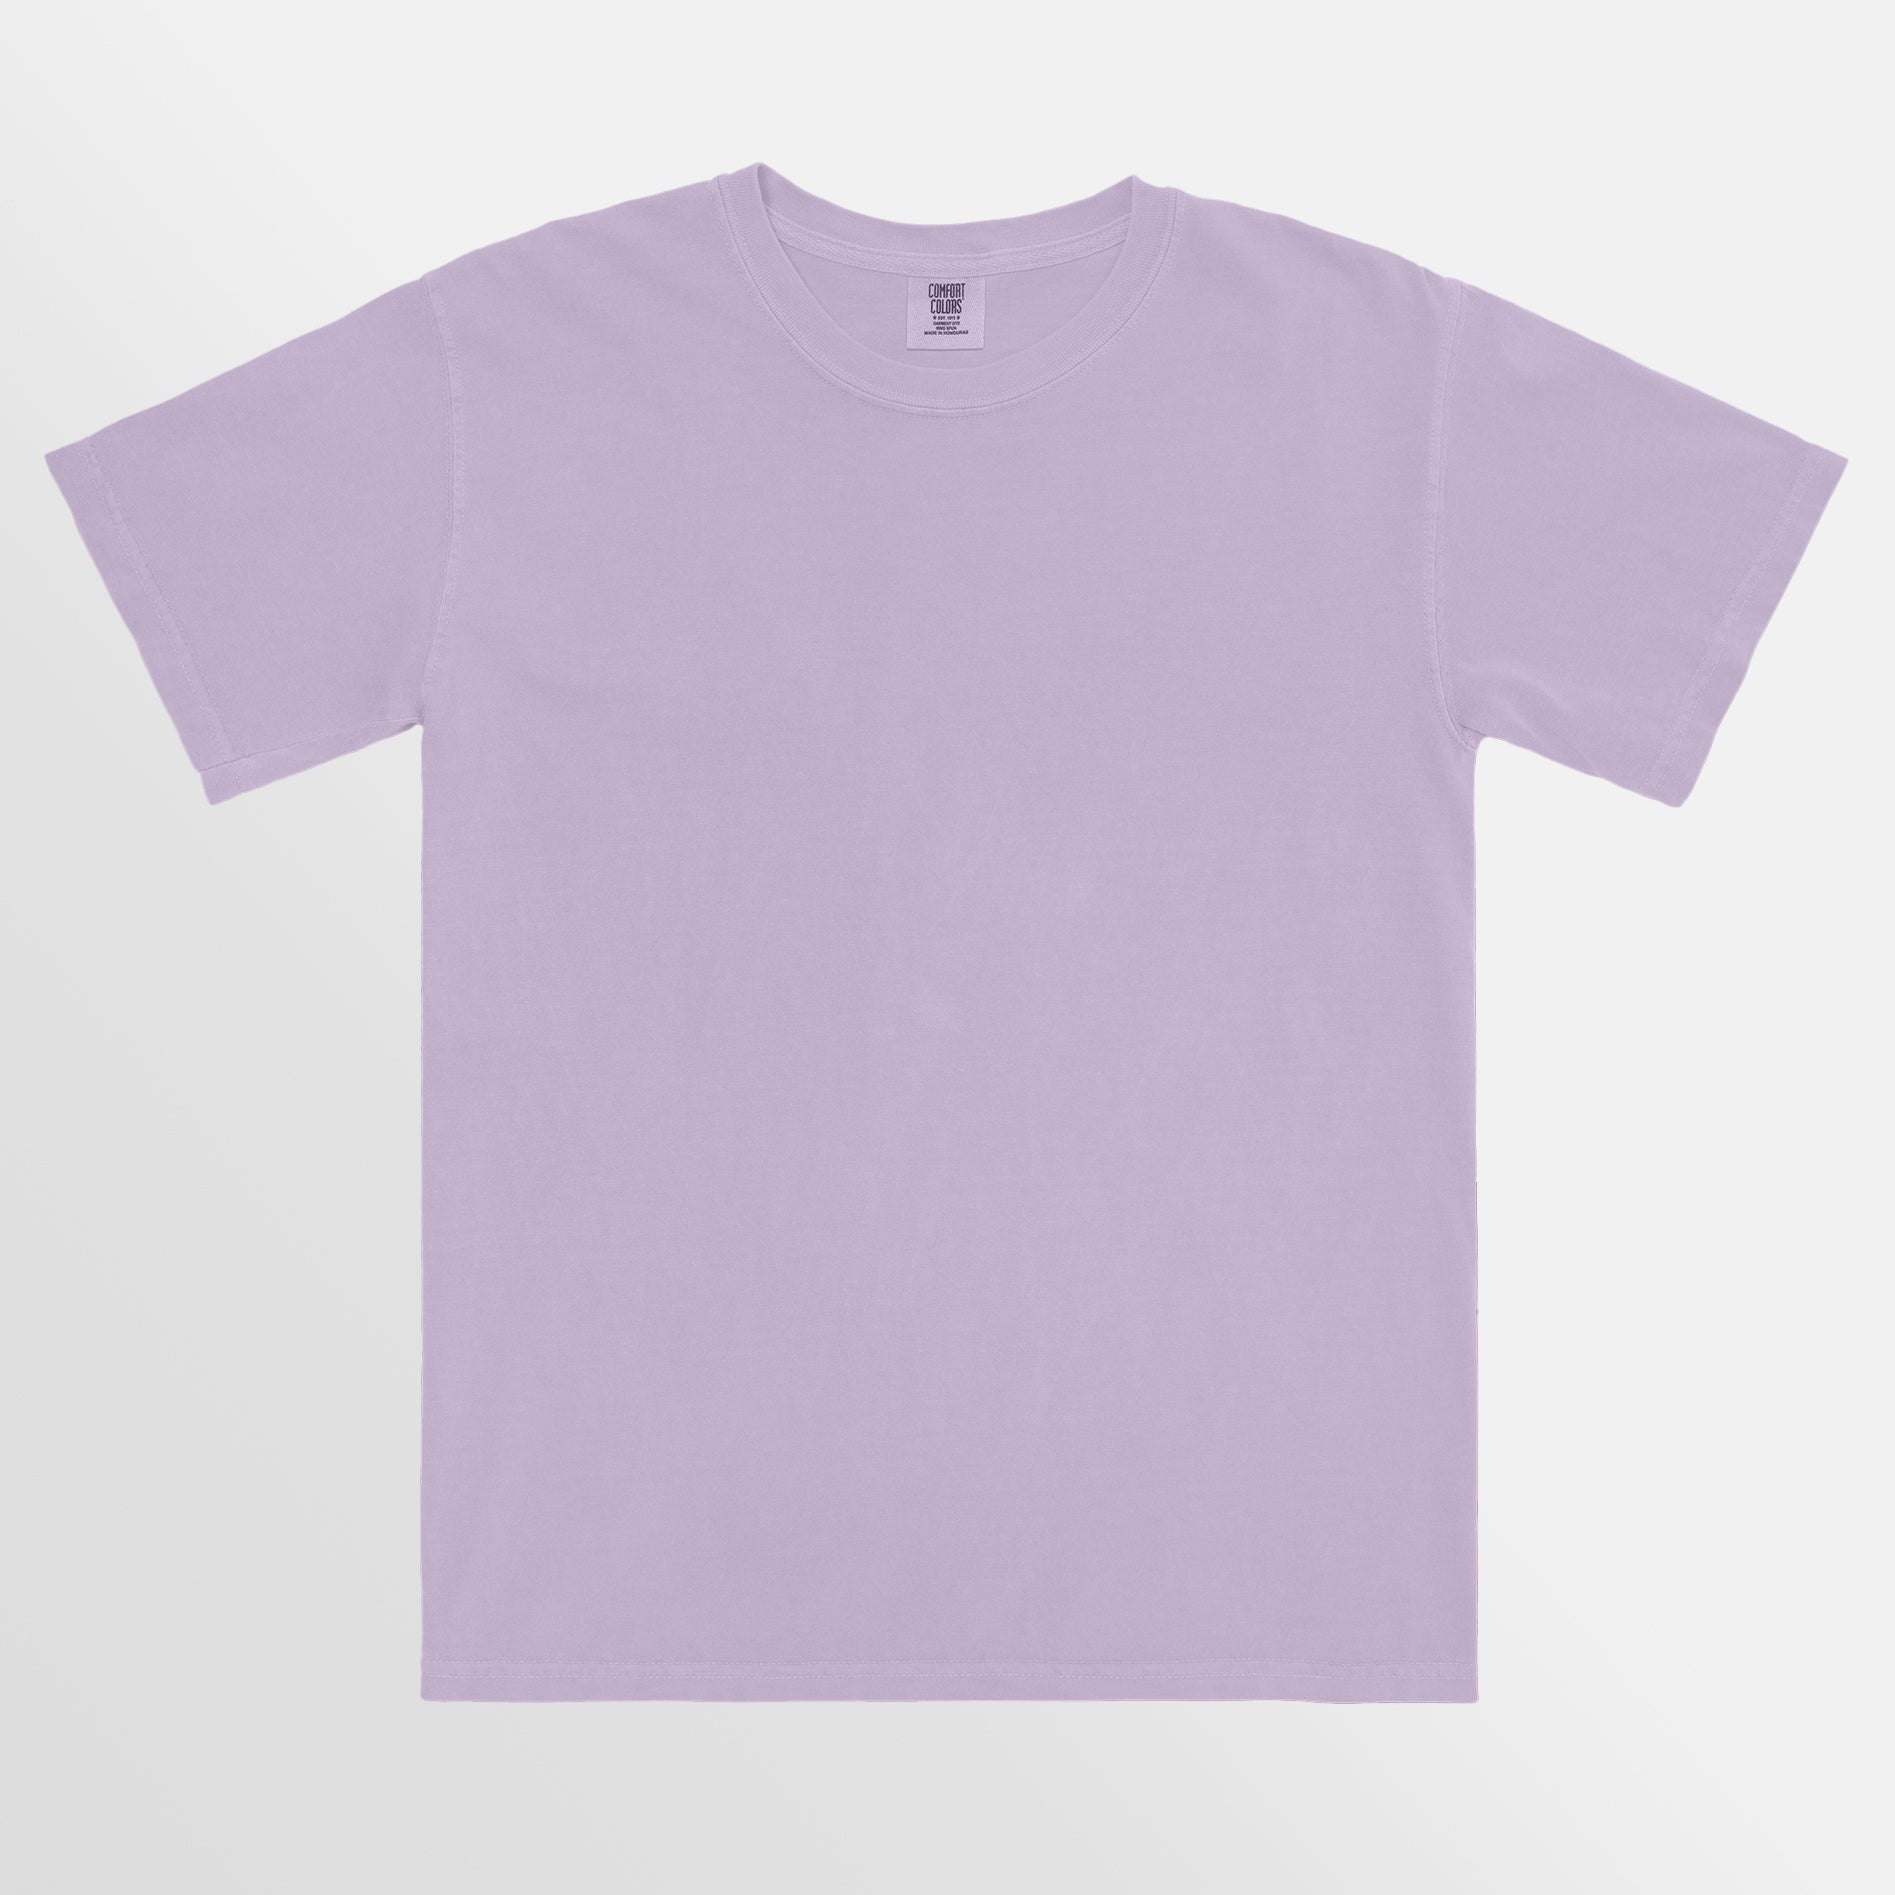 Unisex Comfort Colours Tee - On Request